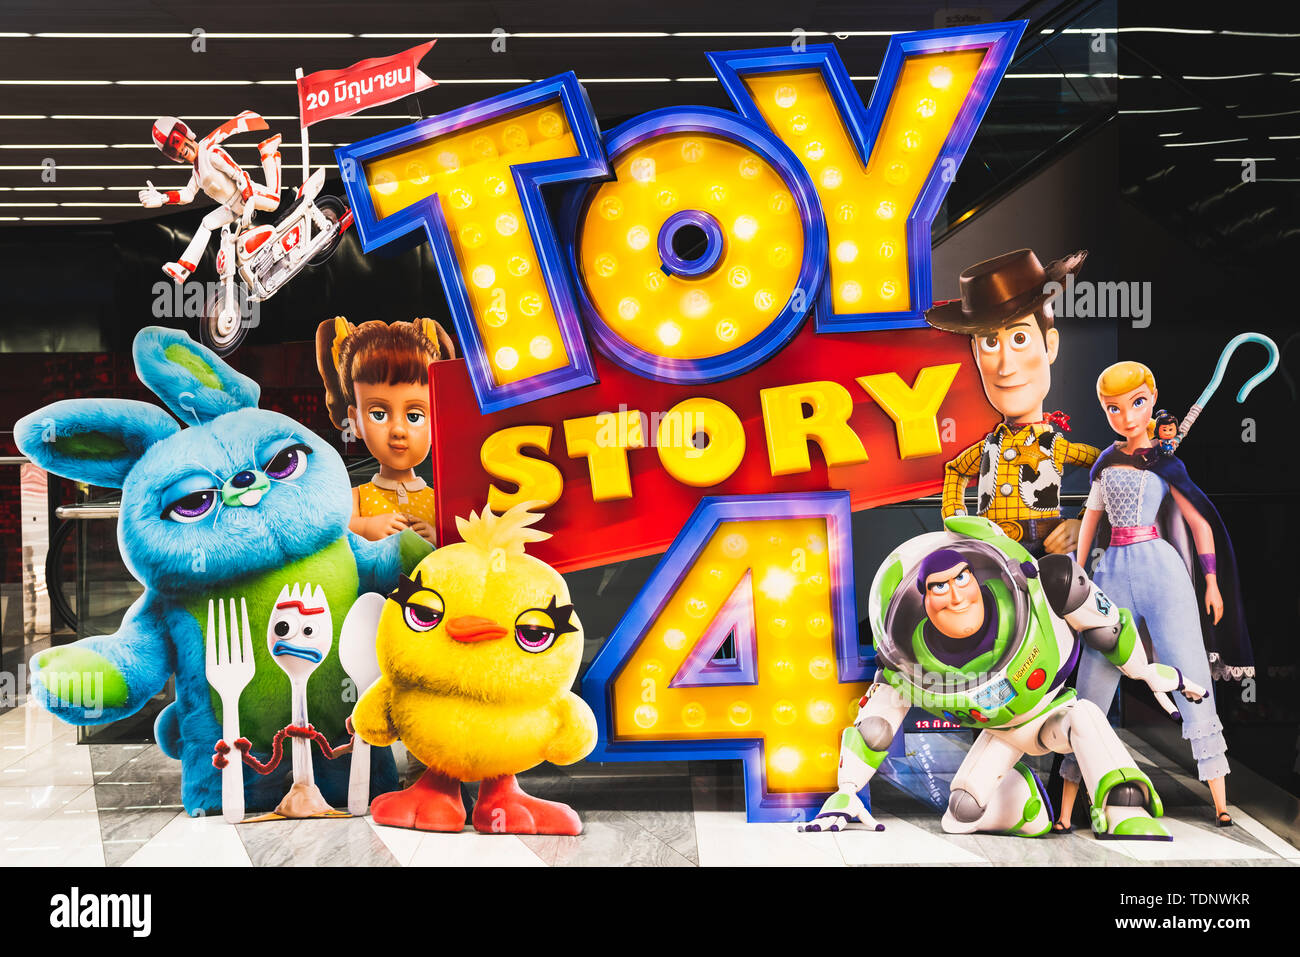 Bangkok, Thailand - Jun 17, 2019: Toy Story 4 movie backdrop display with cartoon characters in movie theatre. Cinema promotional advertisement Stock Photo